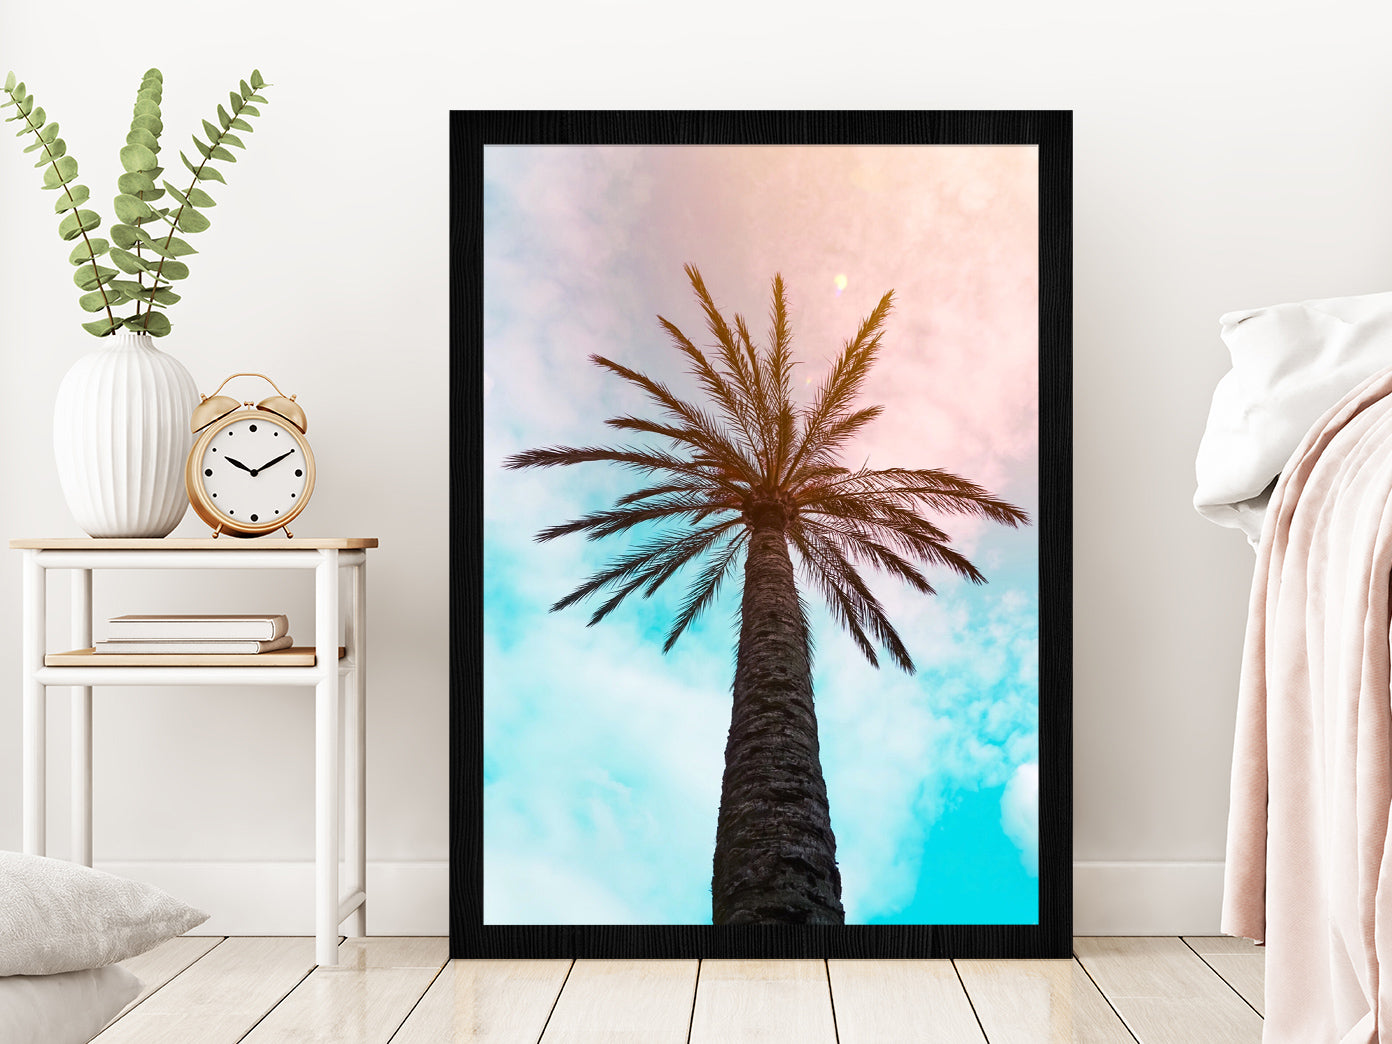 Palm Trees & Blue Pink Sky Scenery Photograph Glass Framed Wall Art, Ready to Hang Quality Print Without White Border Black